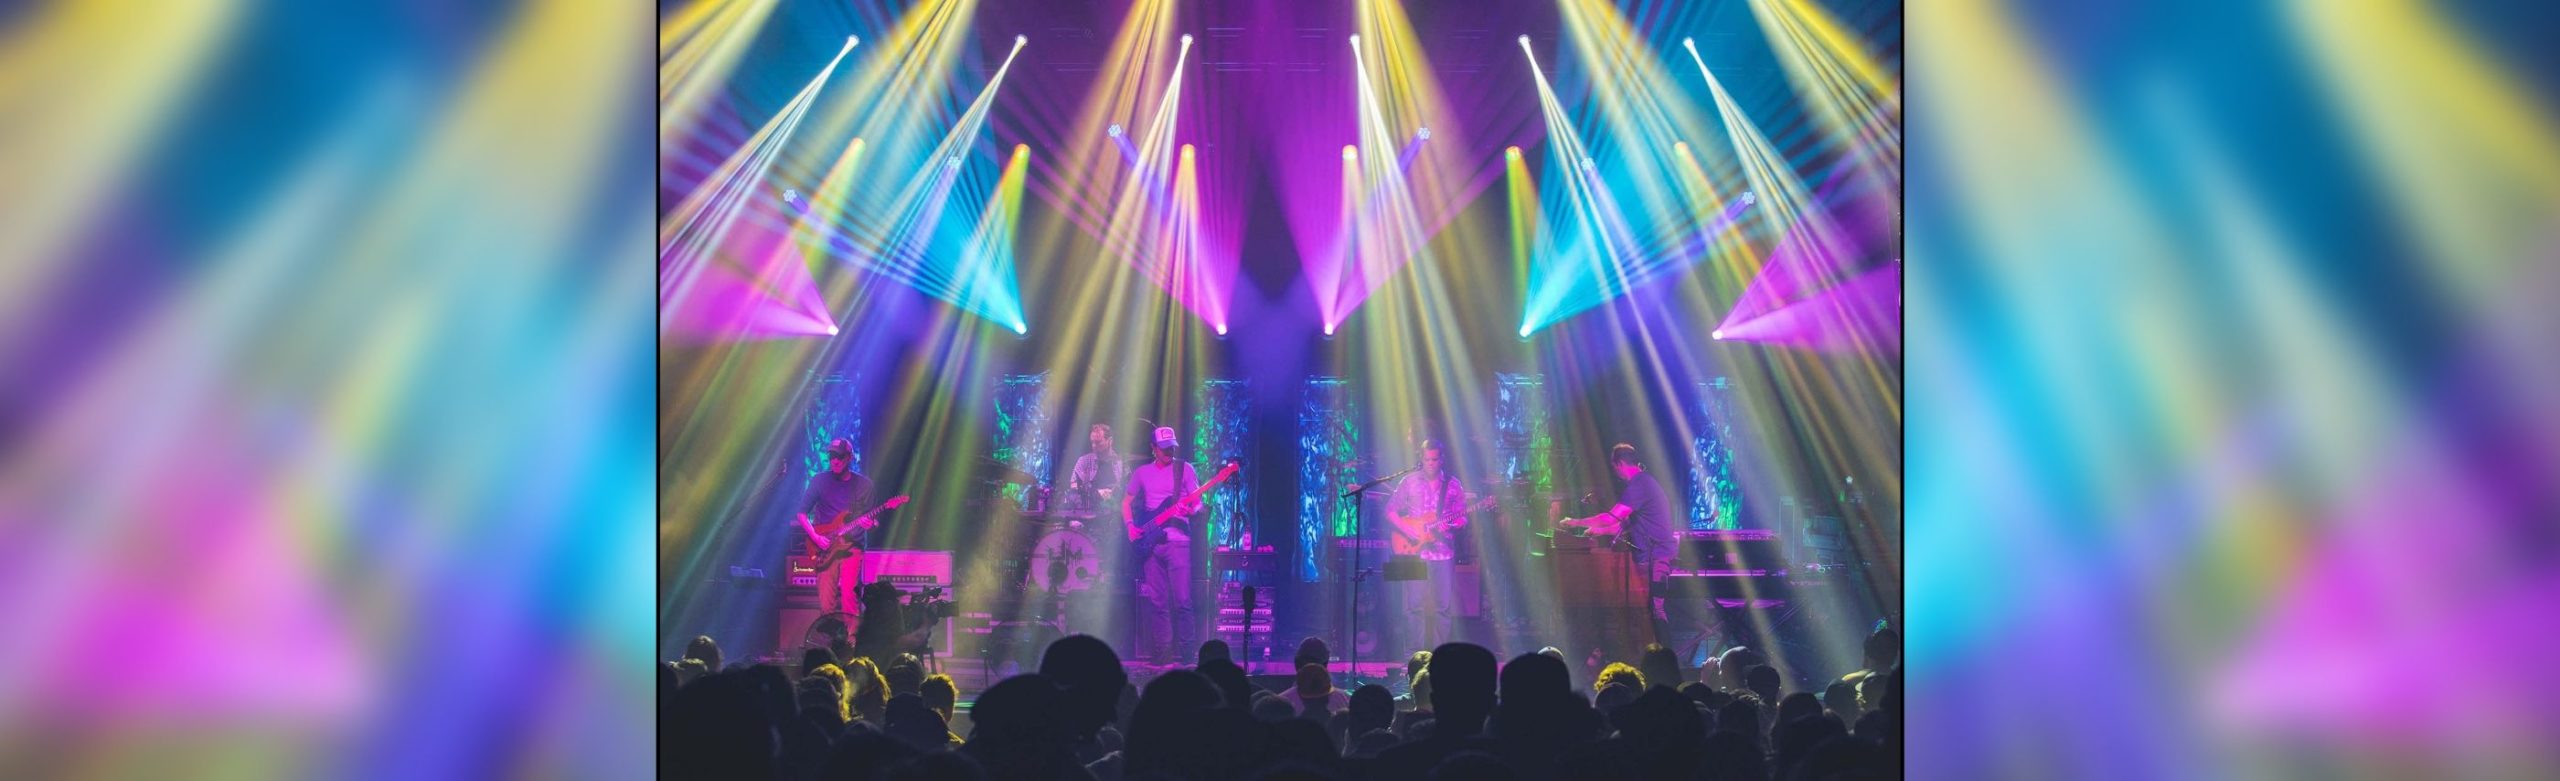 Listen Back: Umphrey’s McGee at the Wilma in 2017 (Live Album) Image